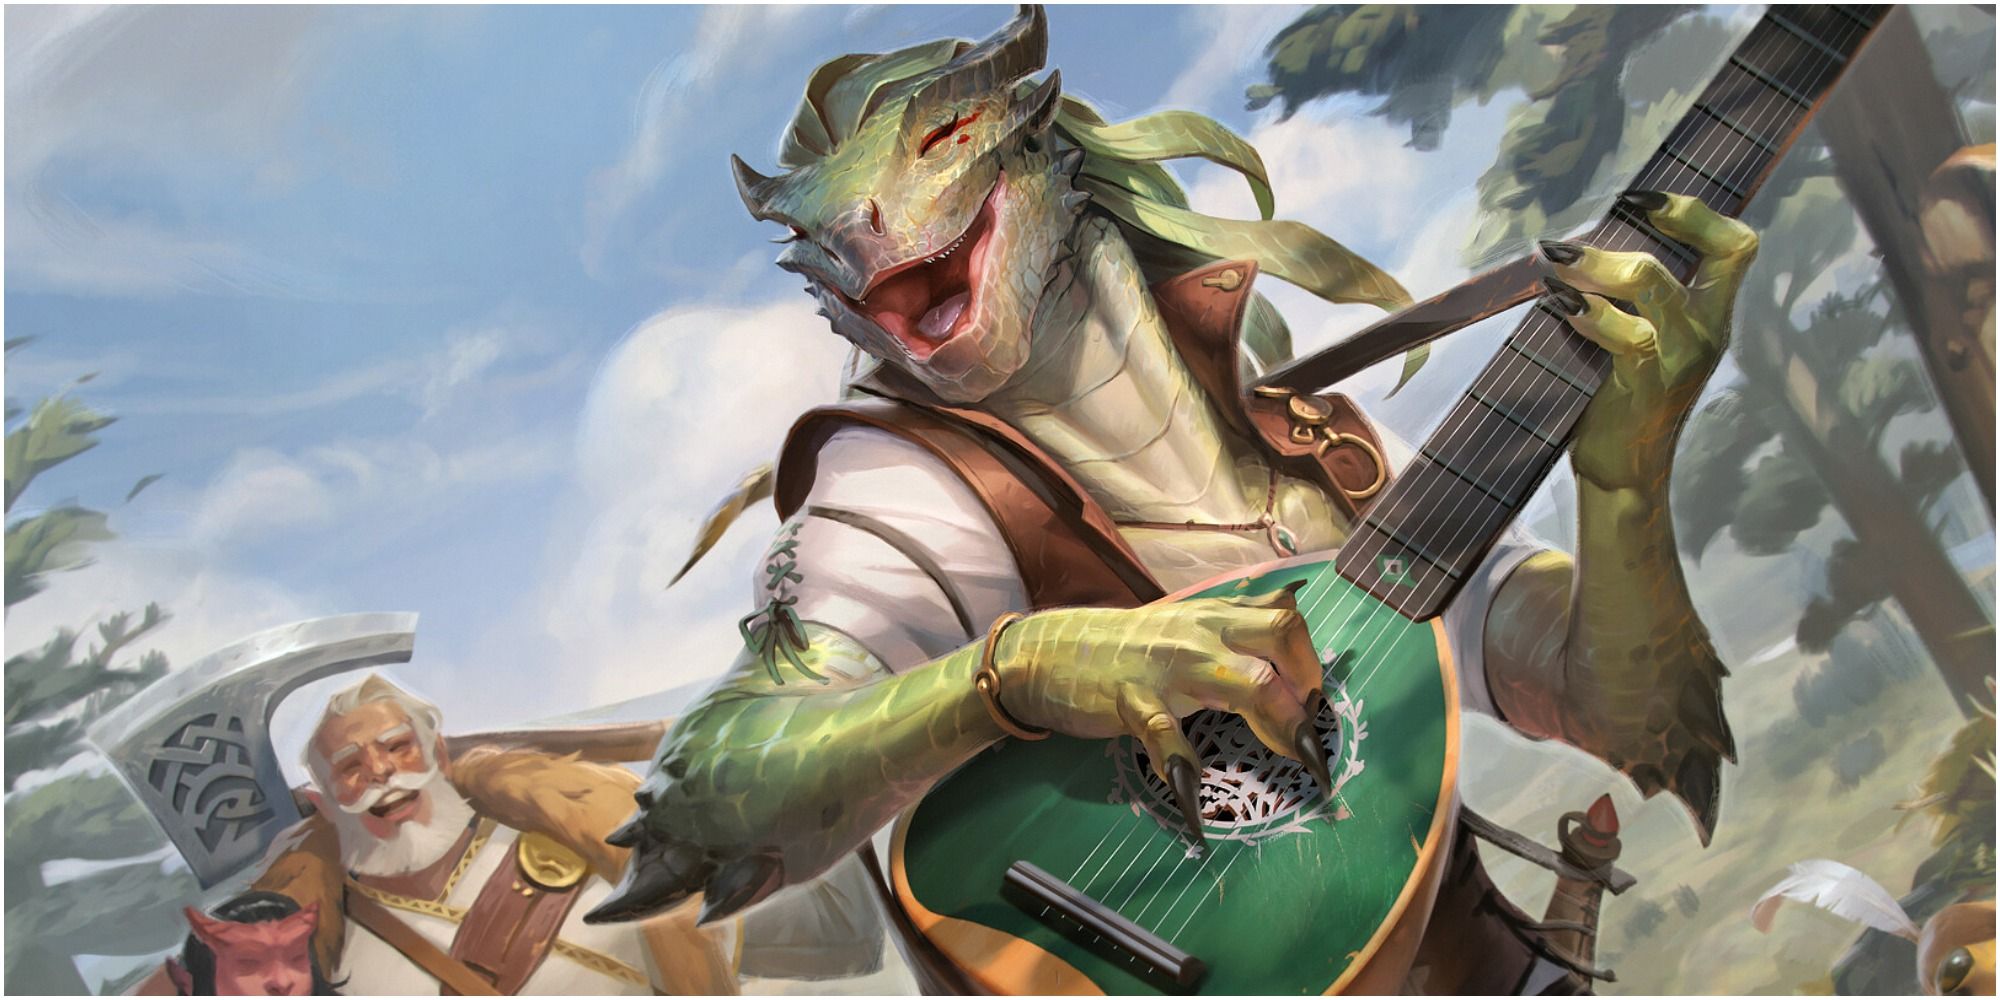 Wandering Troubadour by Rudy Siswanto for MTG